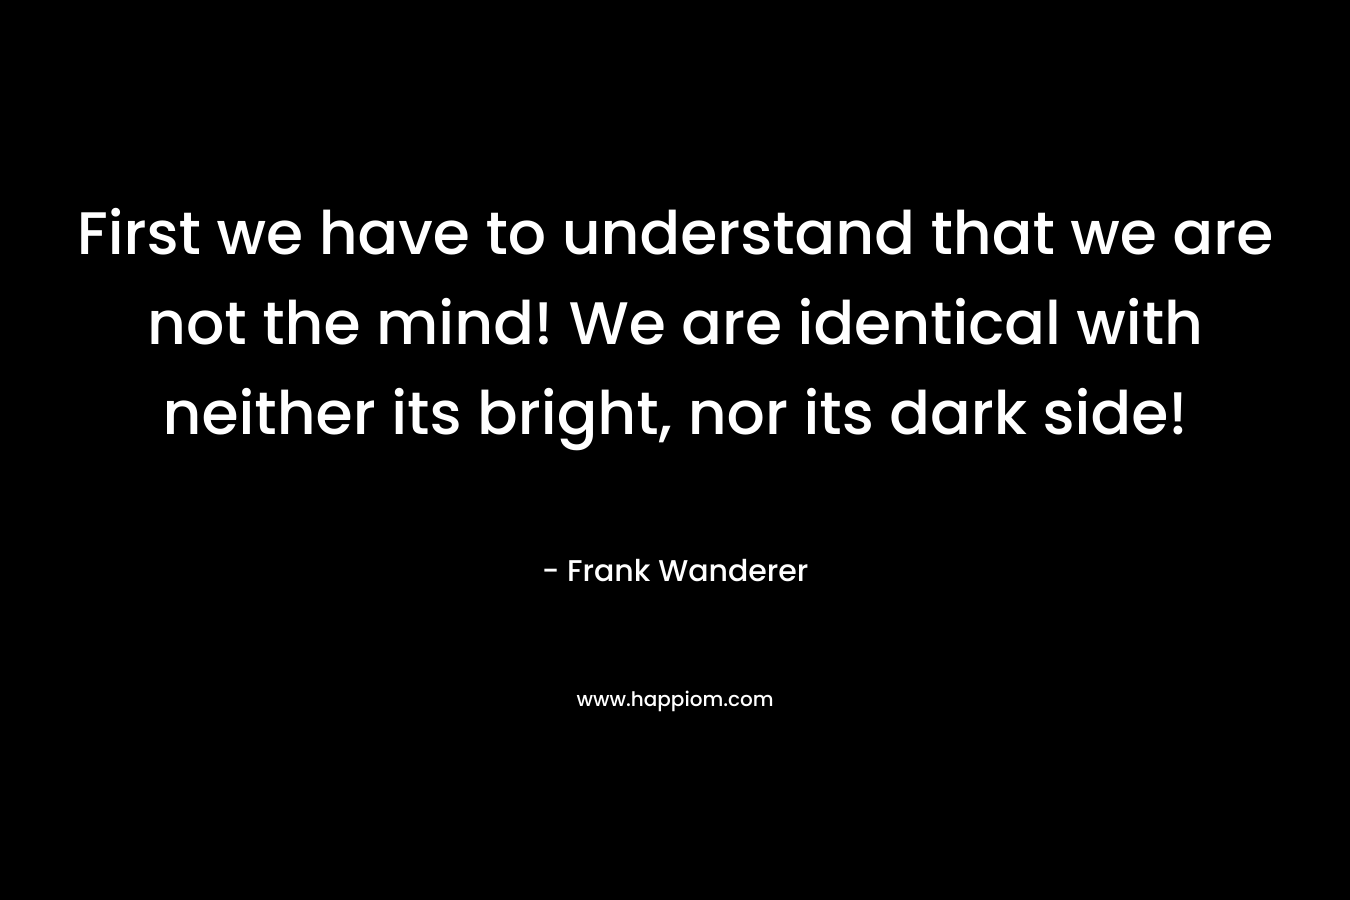 First we have to understand that we are not the mind! We are identical with neither its bright, nor its dark side! – Frank Wanderer